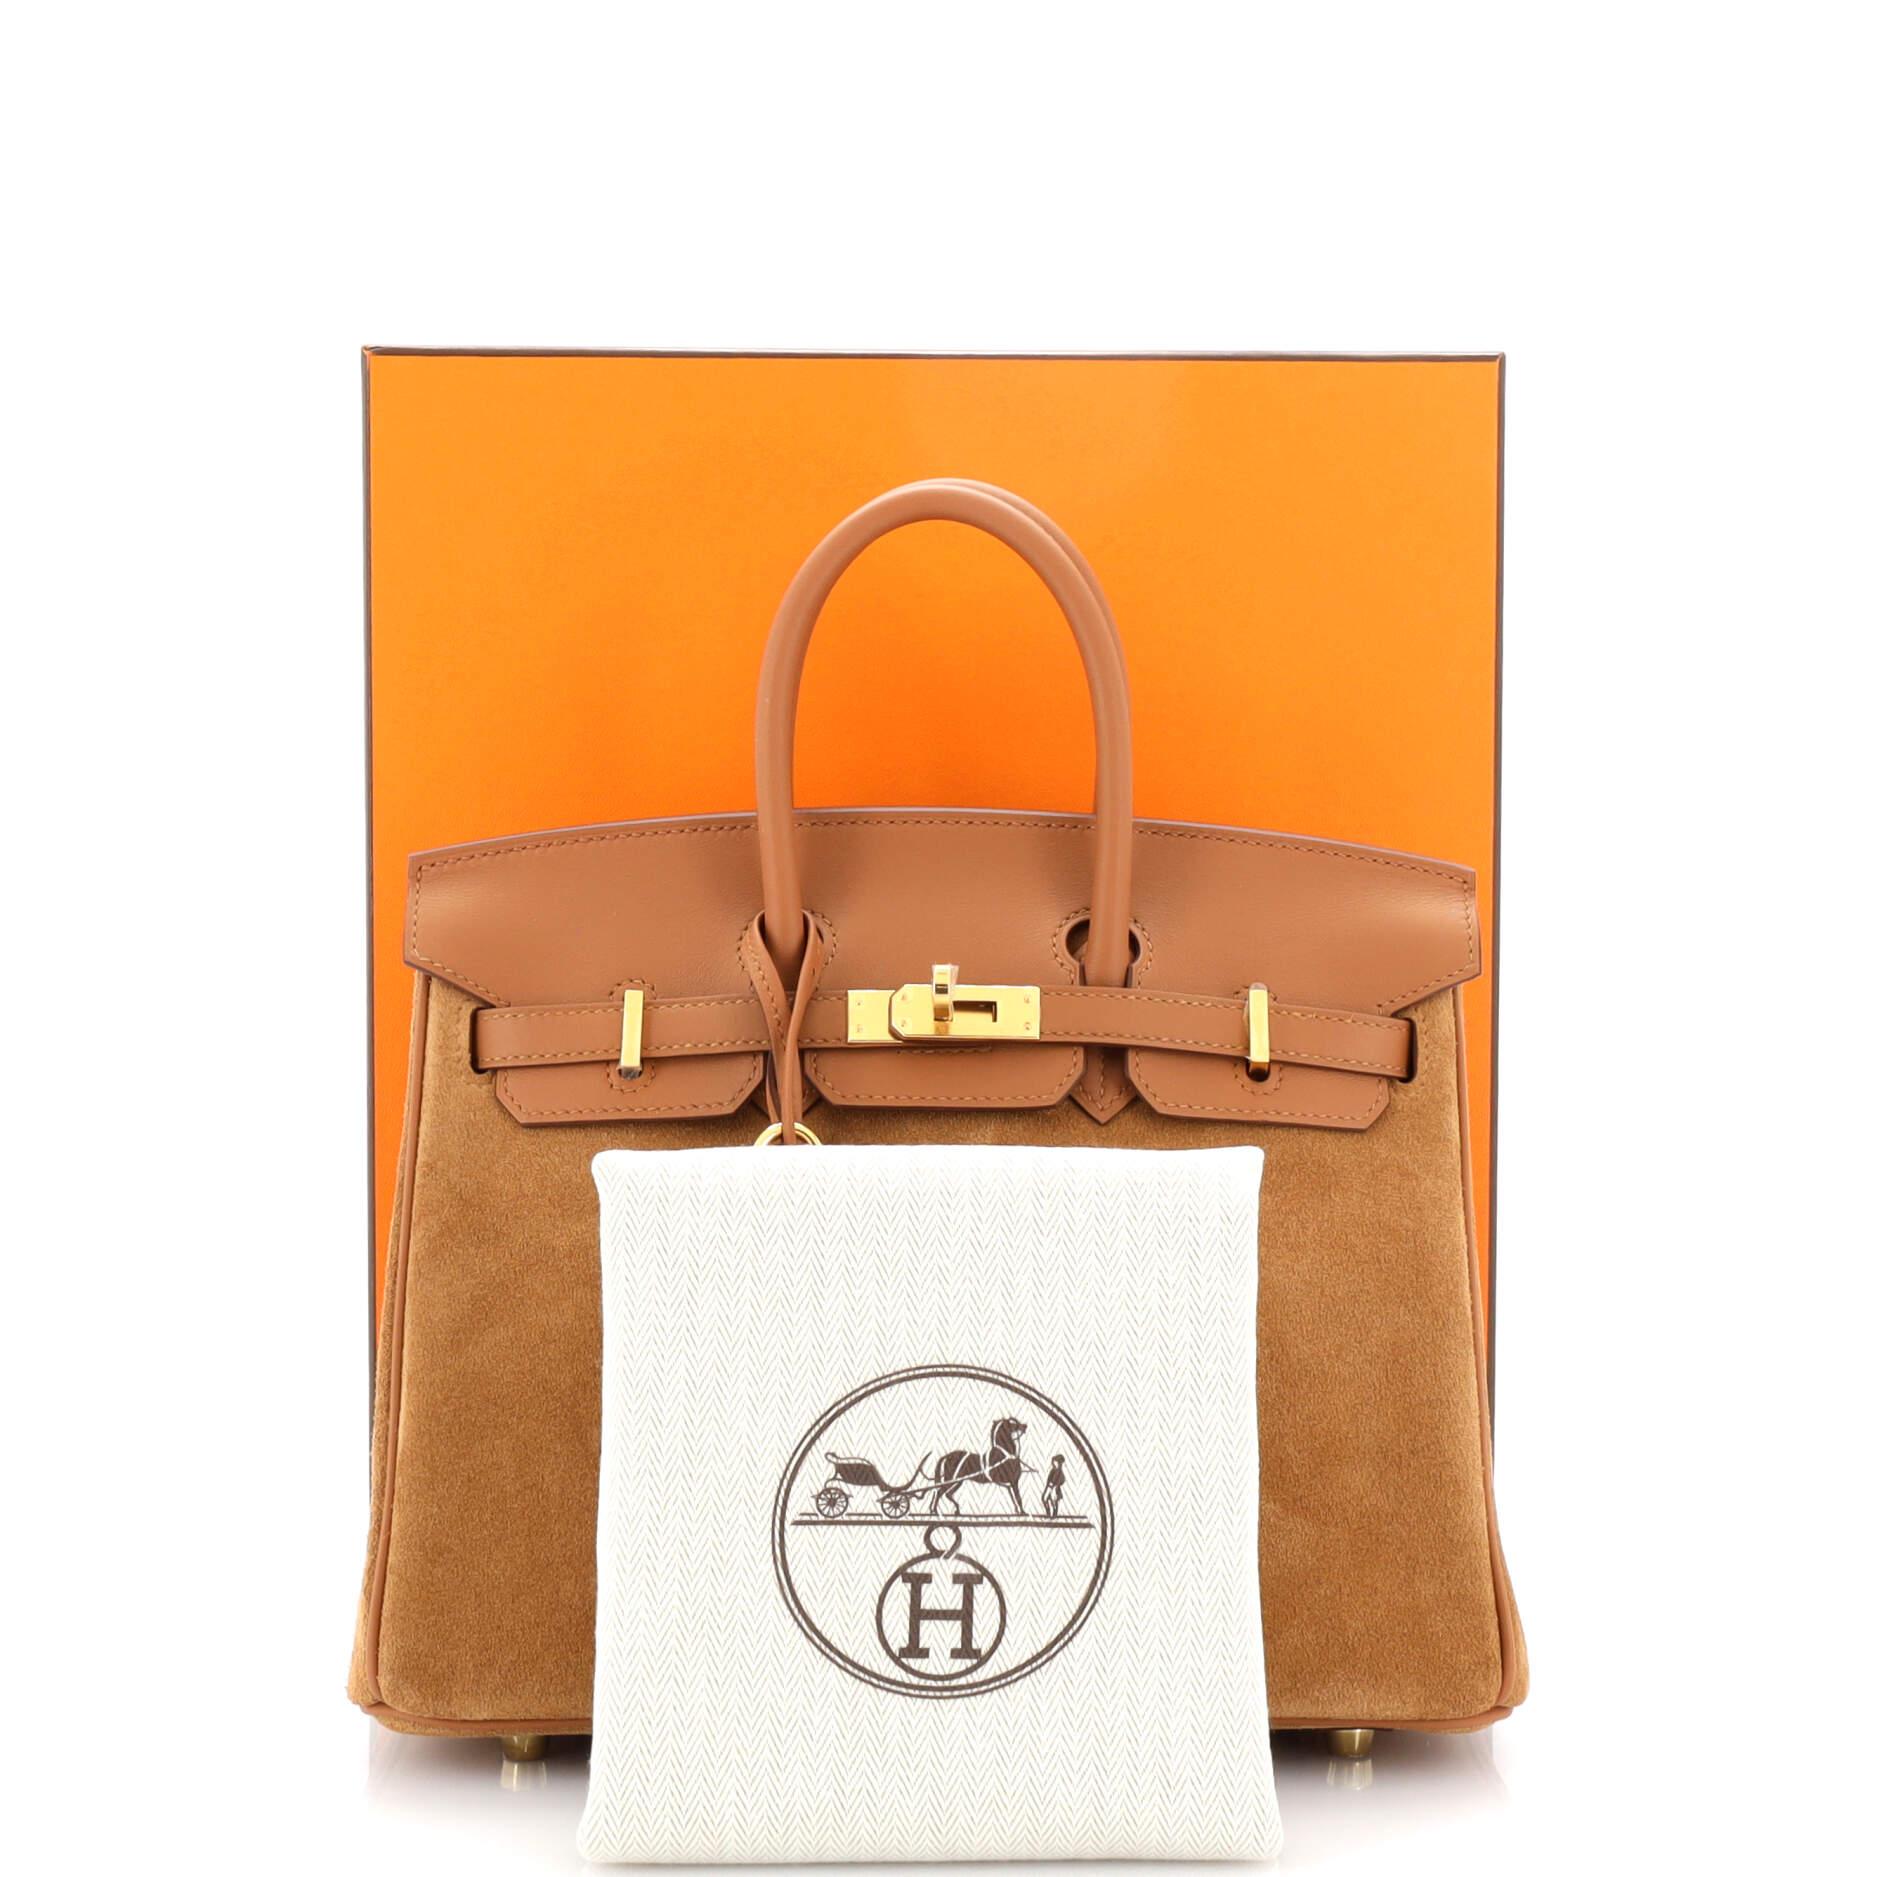 Hermes Birkin 25 Limited Edition Grizzly Gris Caillou Etoupe Swift Leather  Bag